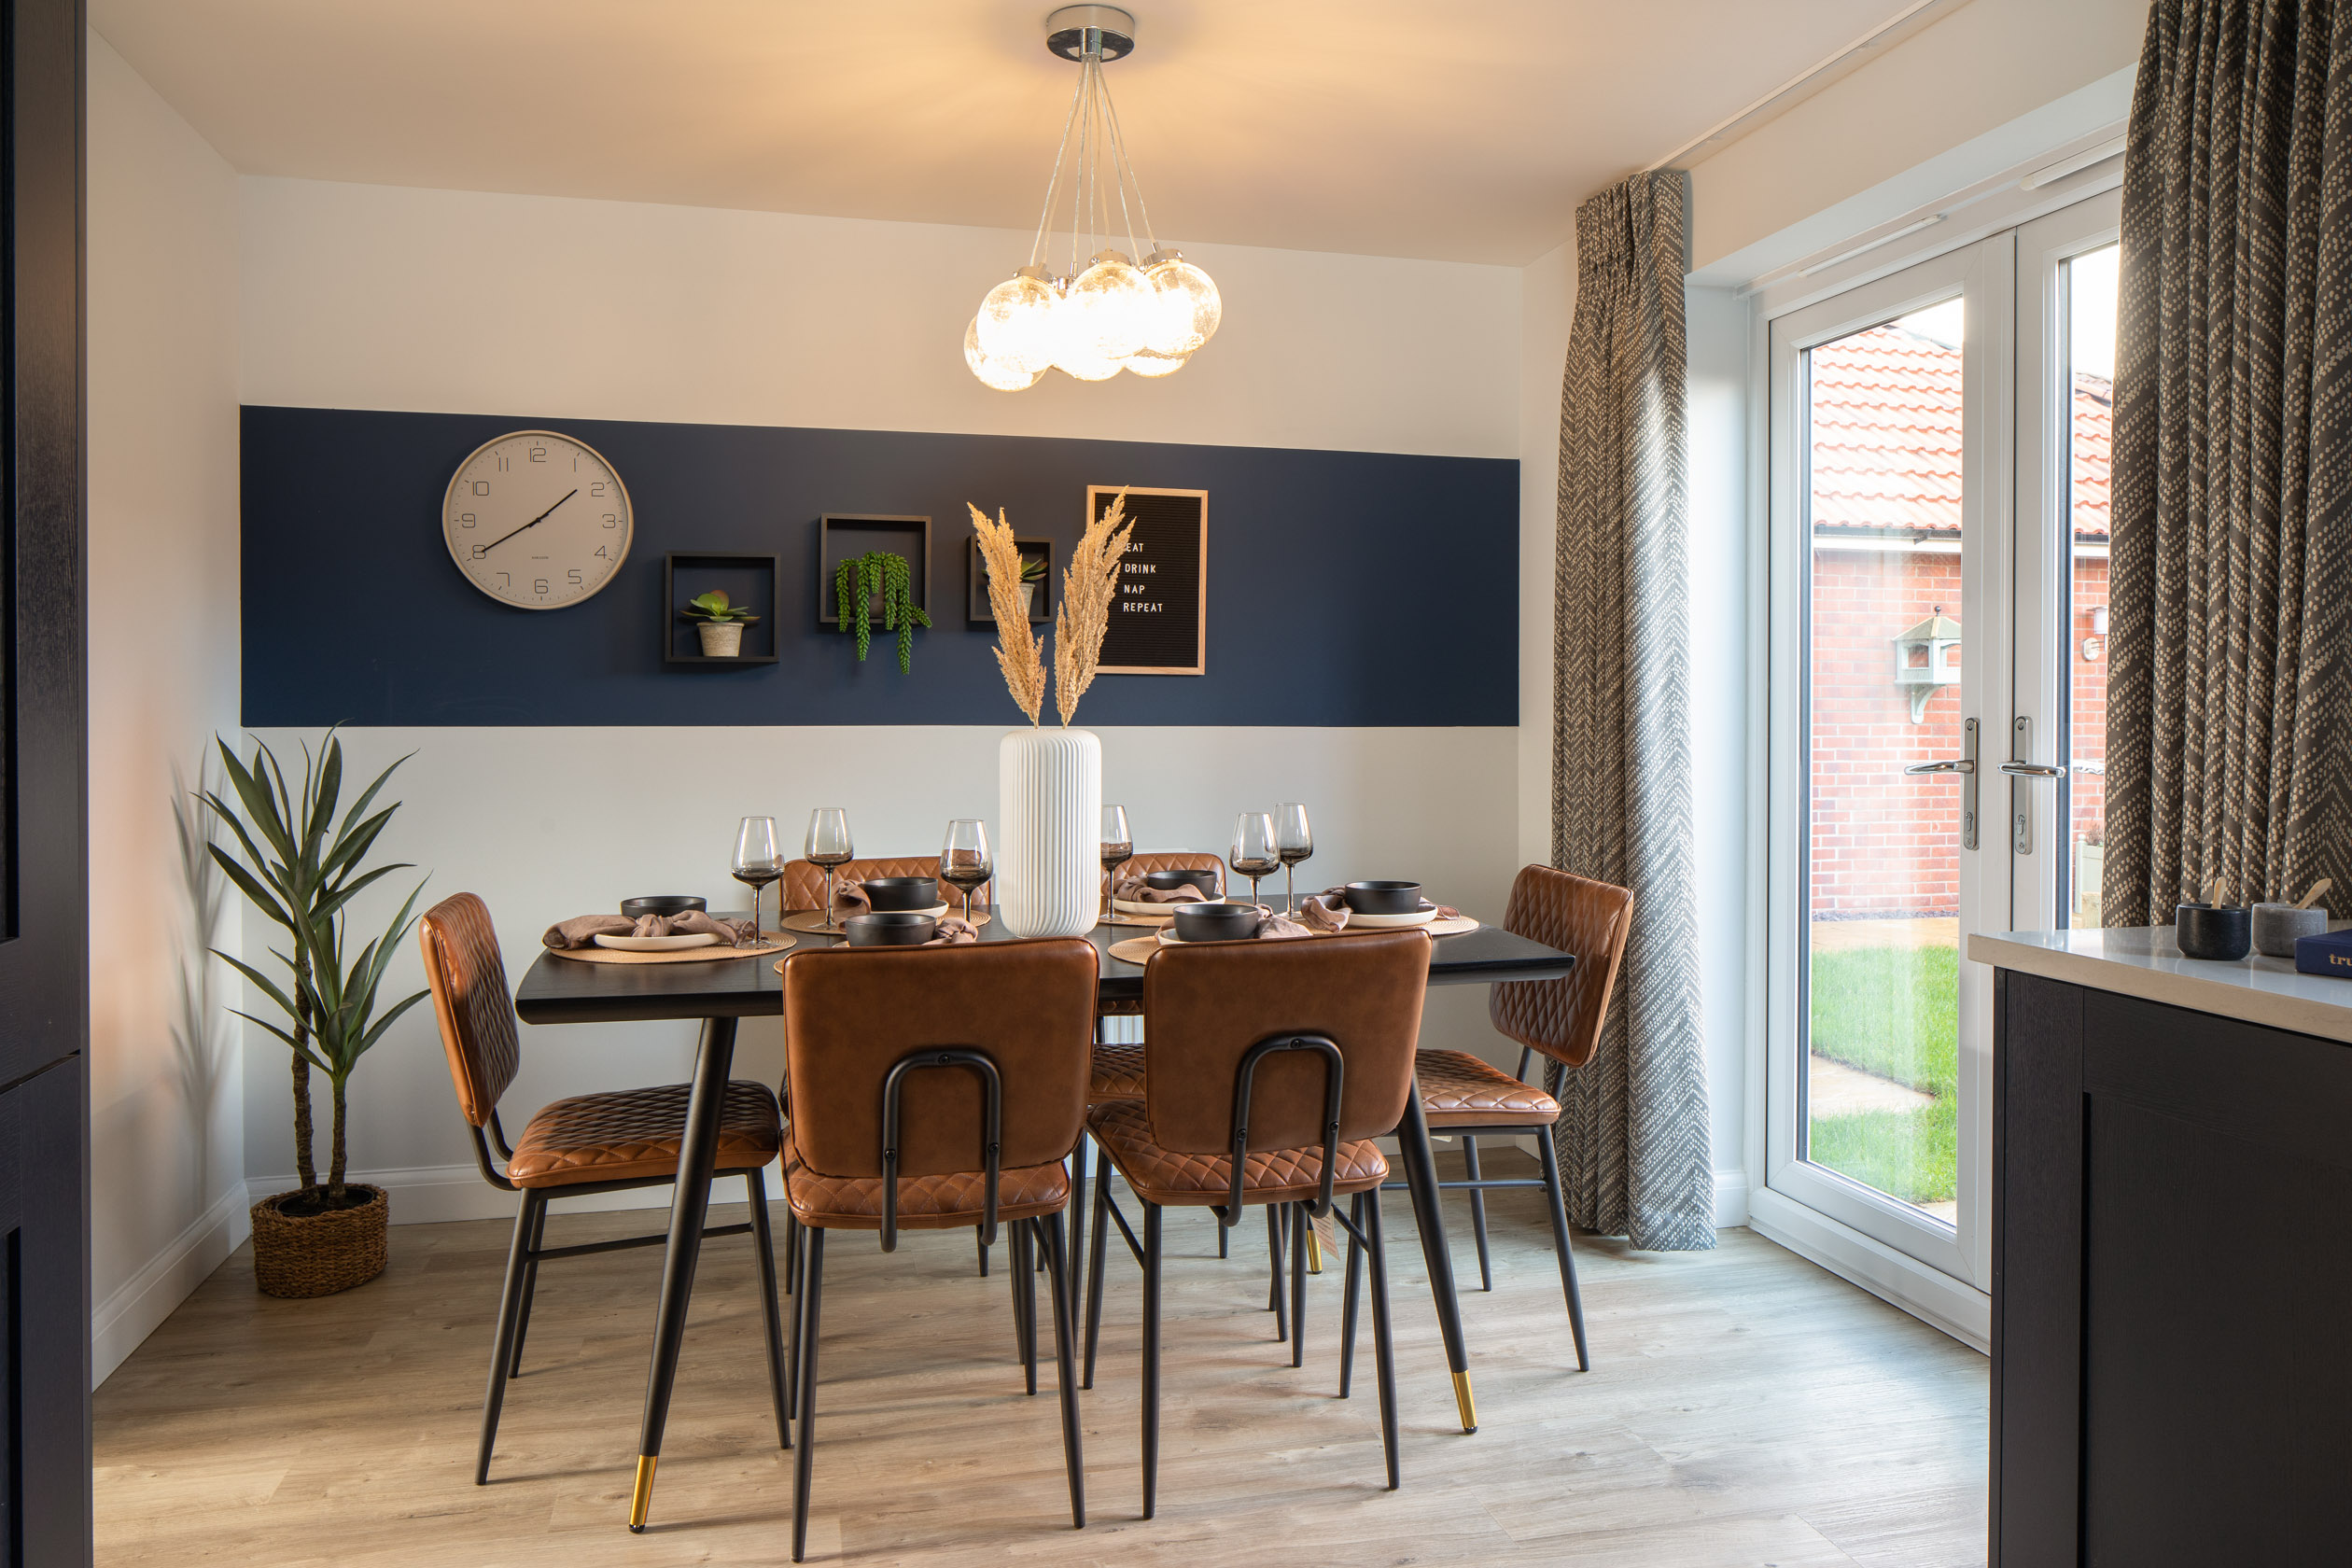 Property 3 of 10. Dining Area In The Ellerton Three Bedroom Home